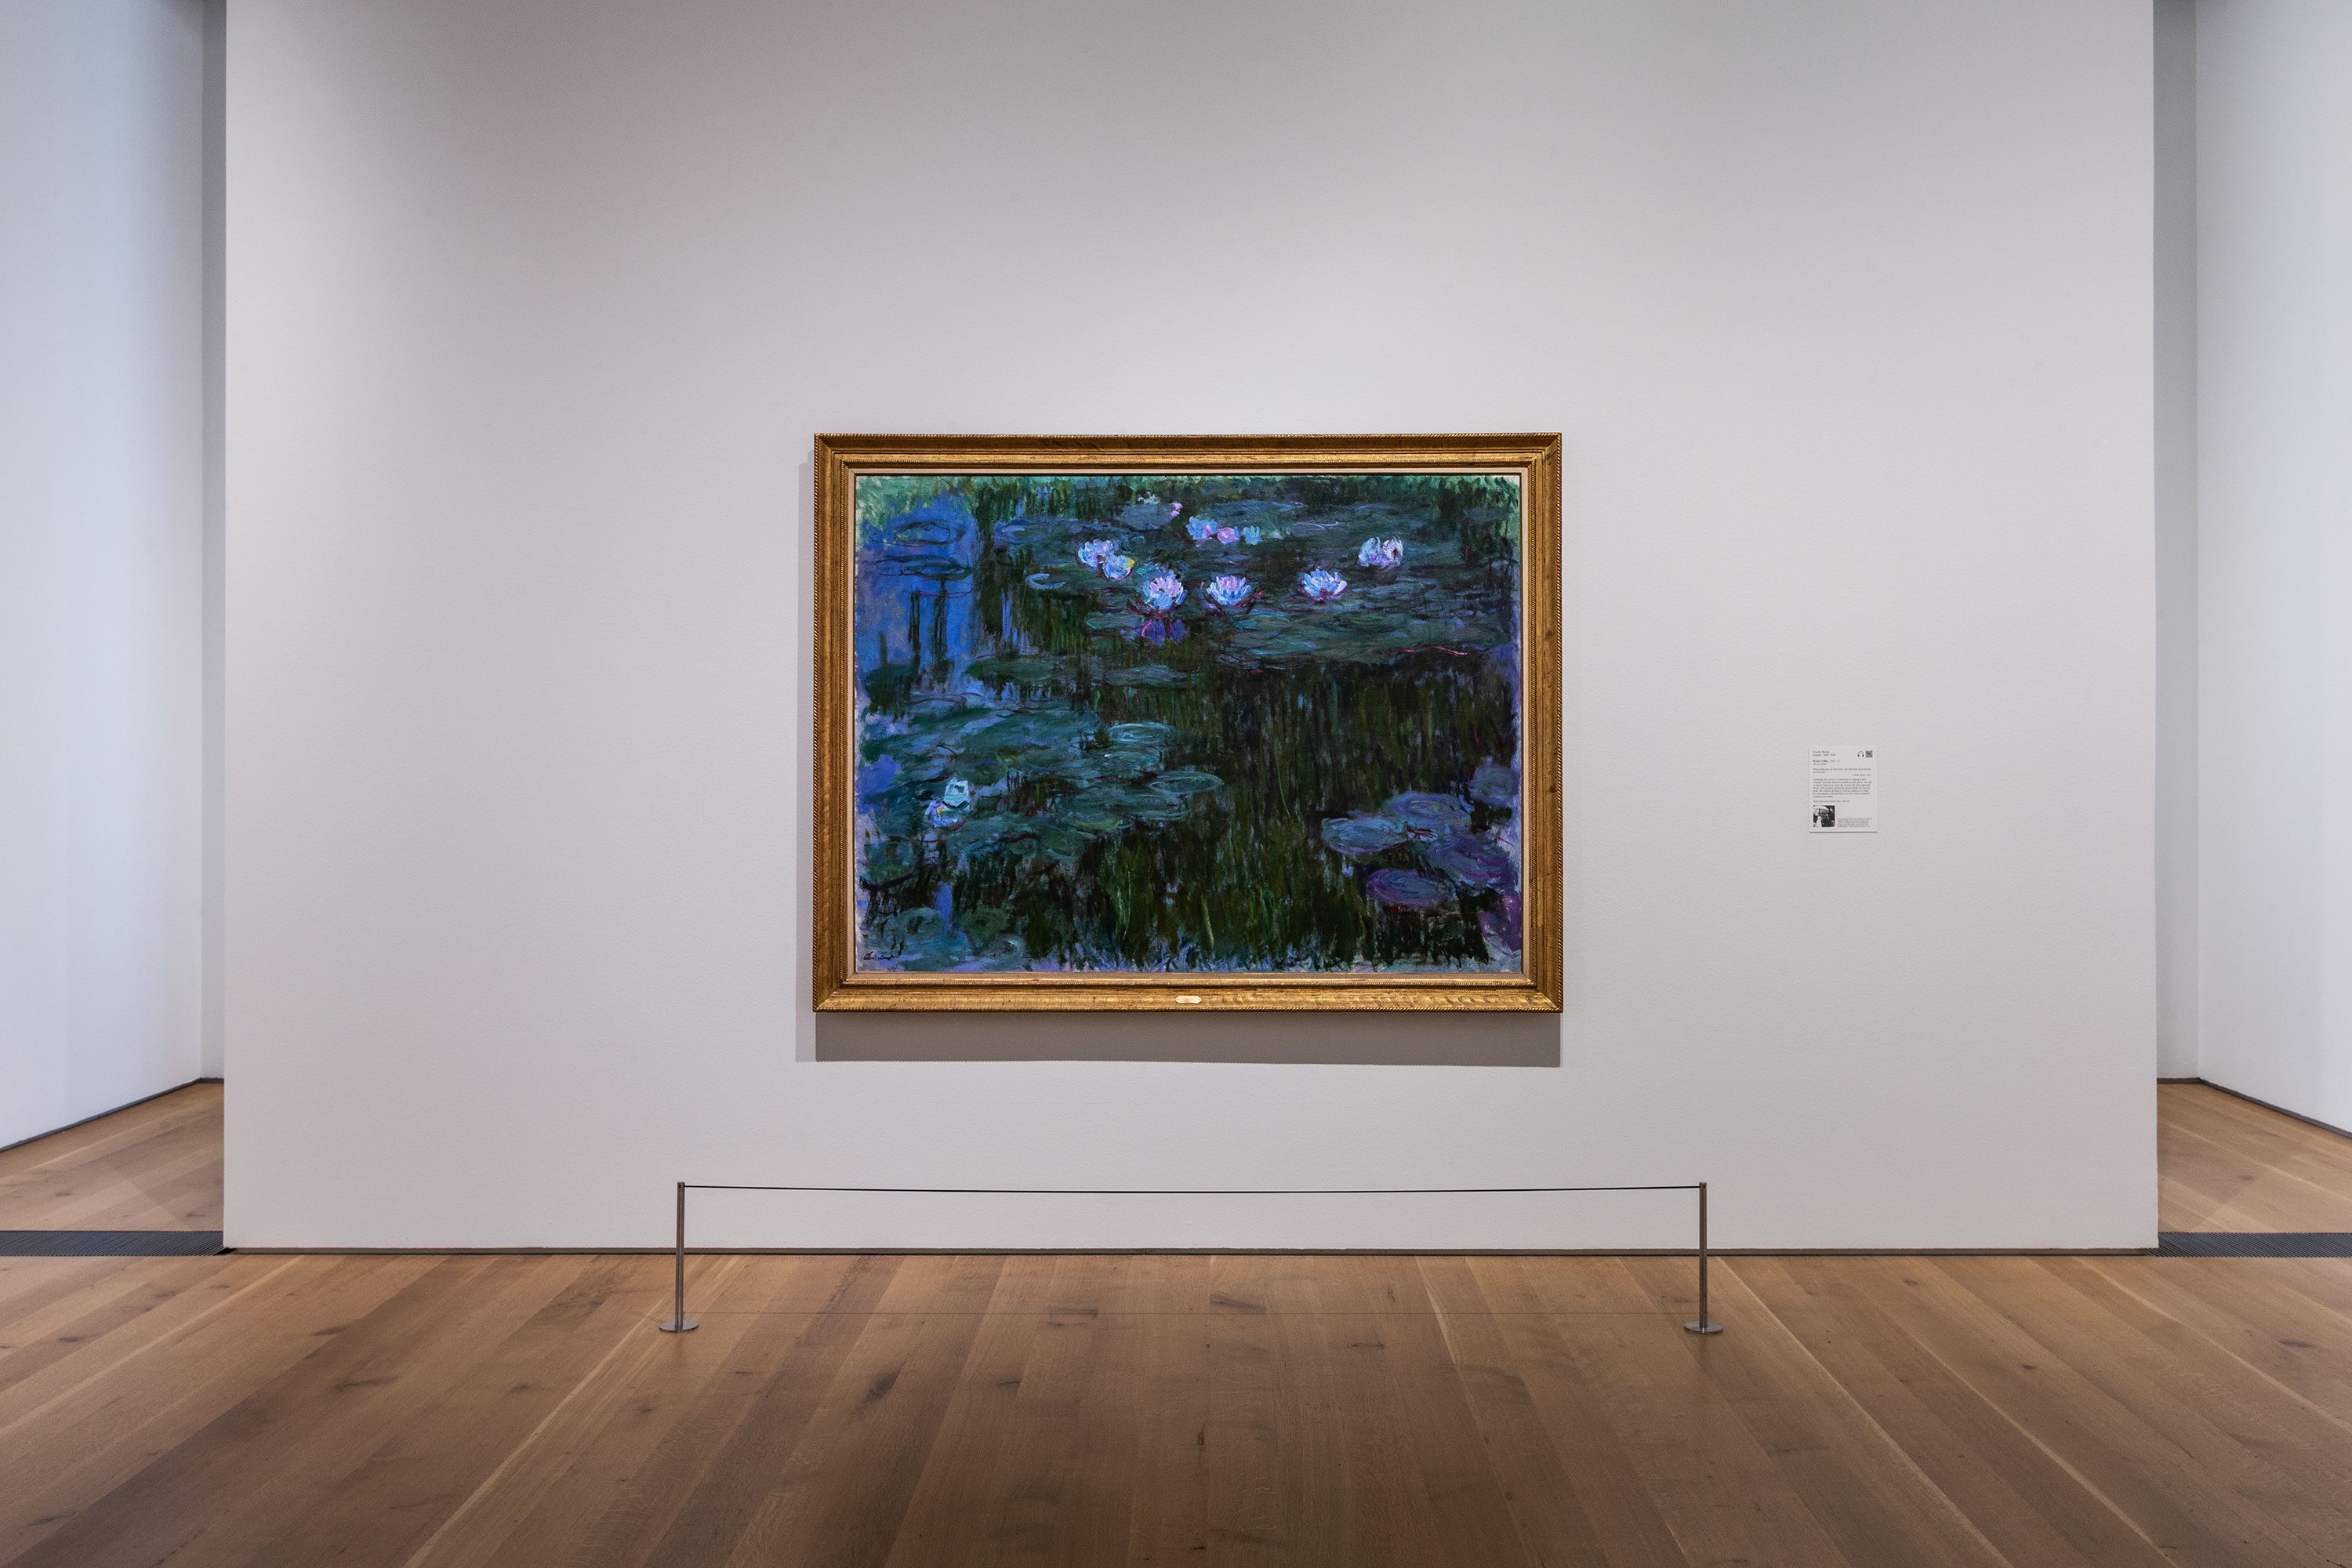 Joan Mitchell reflects Monet's waterlilies in Bois de Boulogne and Barcelo  uses Grisaille in Pantin